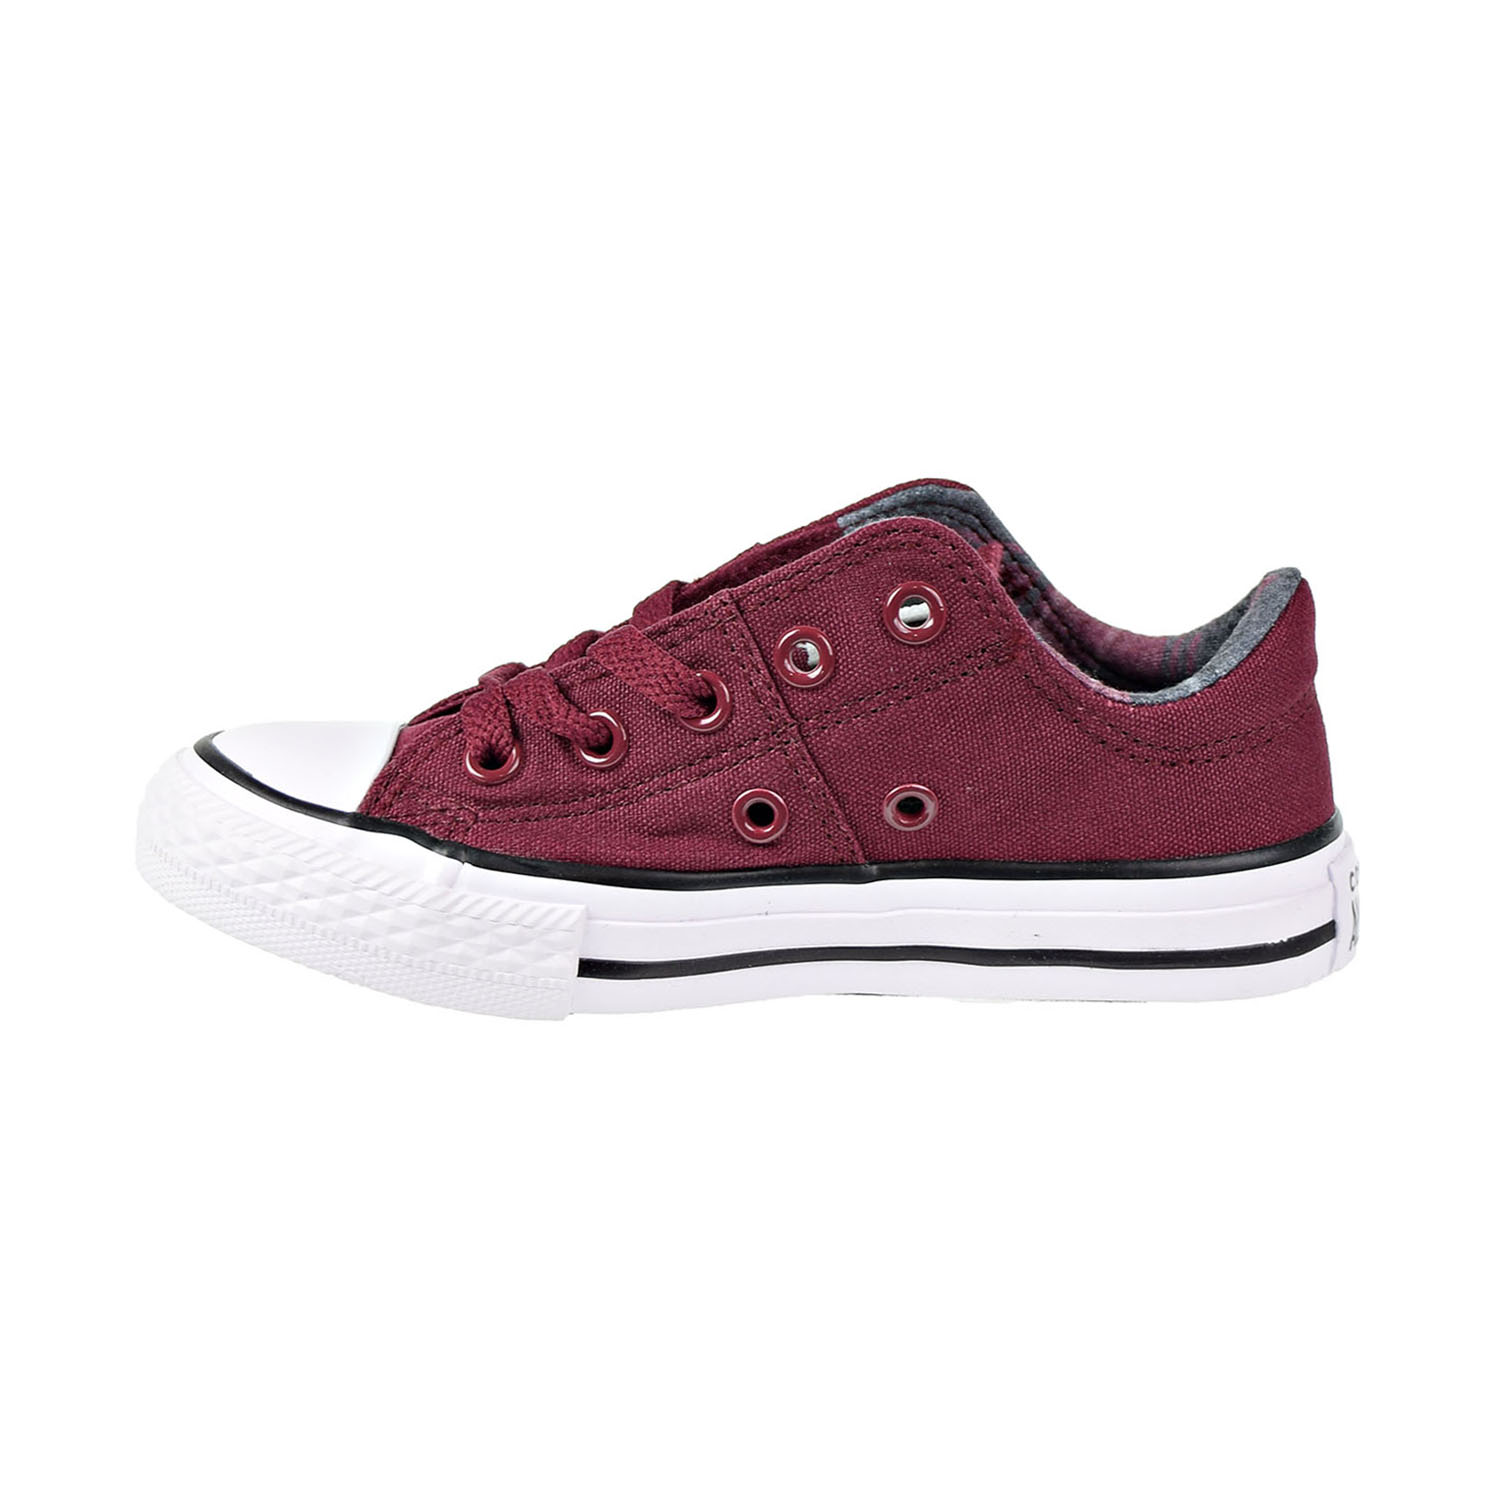 Converse Chuck Taylor All Star Madison Ox Little Kids/Big Kids Shoes Burgundy 661912f - image 4 of 6